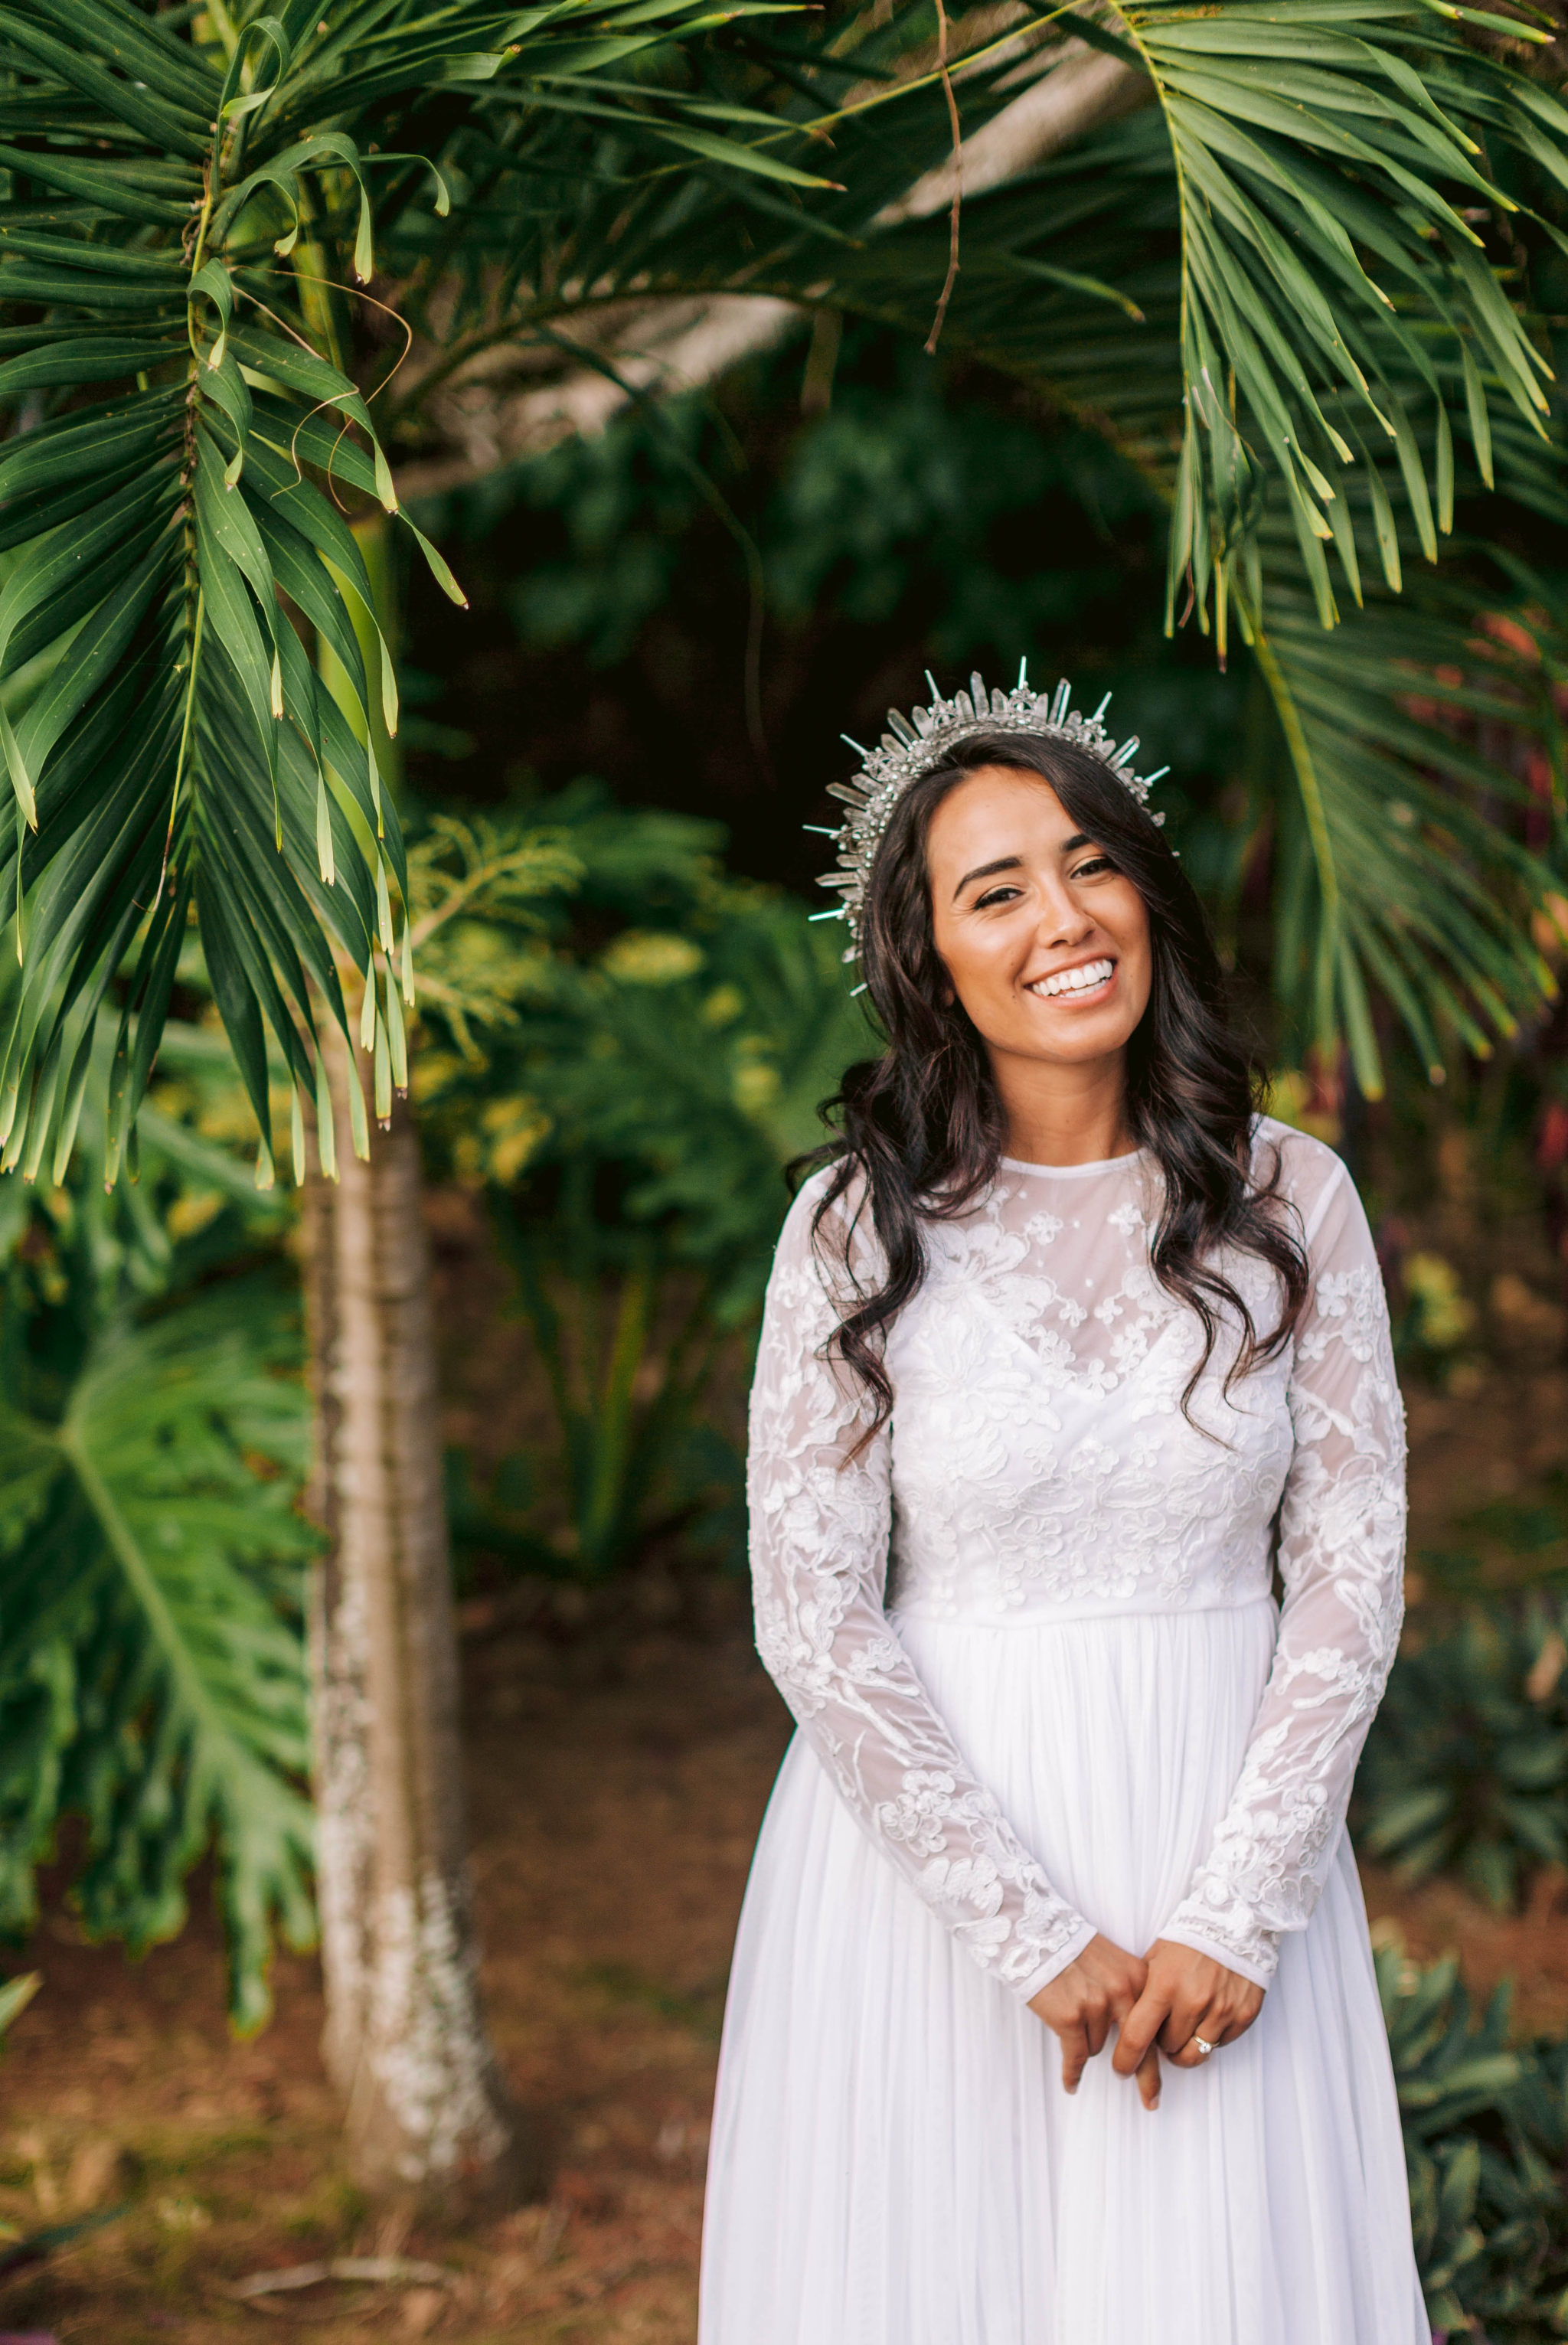  Tropical Bridal Portraits - Bride is wearing a wedding dress by asos and a unique crown under palm trees - Ana + Elijah - Wedding at Loulu Palm in Haleiwa, HI - Oahu Hawaii Wedding Photographer 